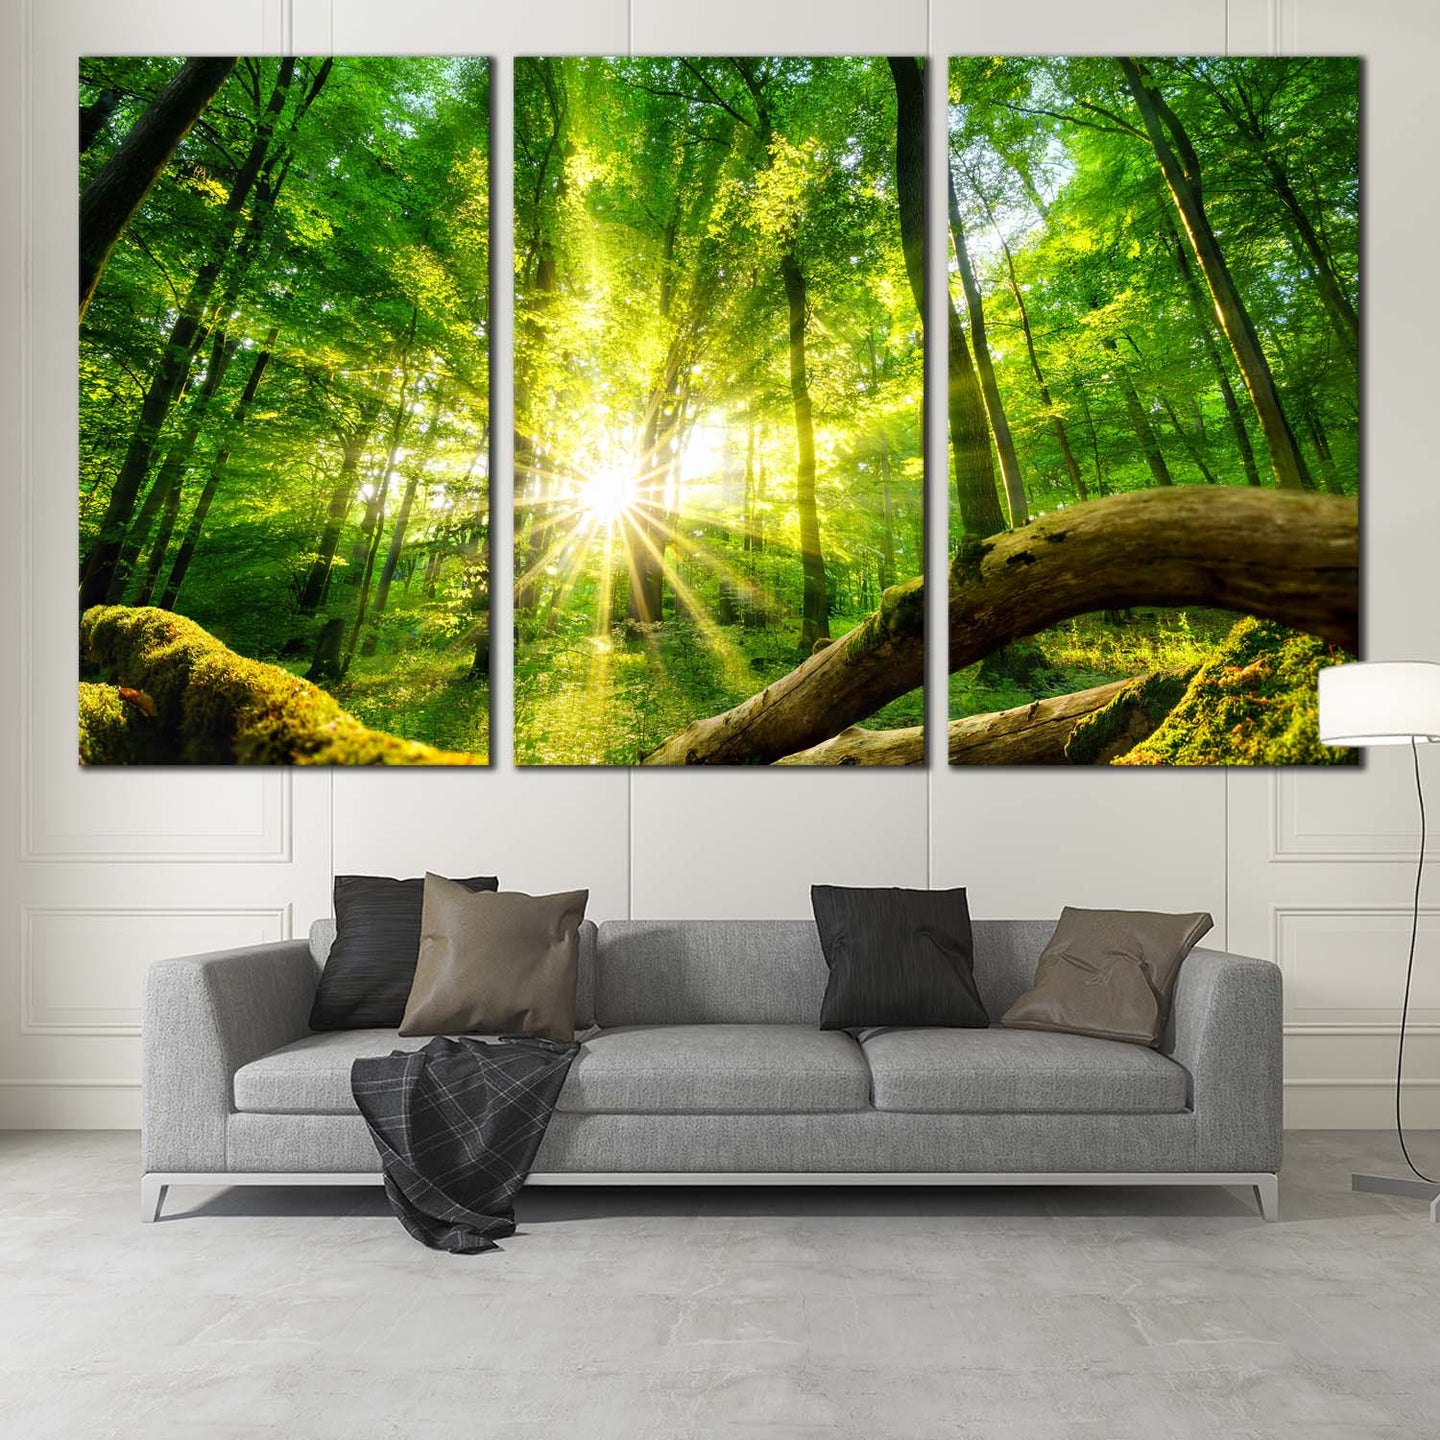 Tranquil Forest Canvas Wall Art, Green Trees Scenery 3 Piece Canvas Pr ...